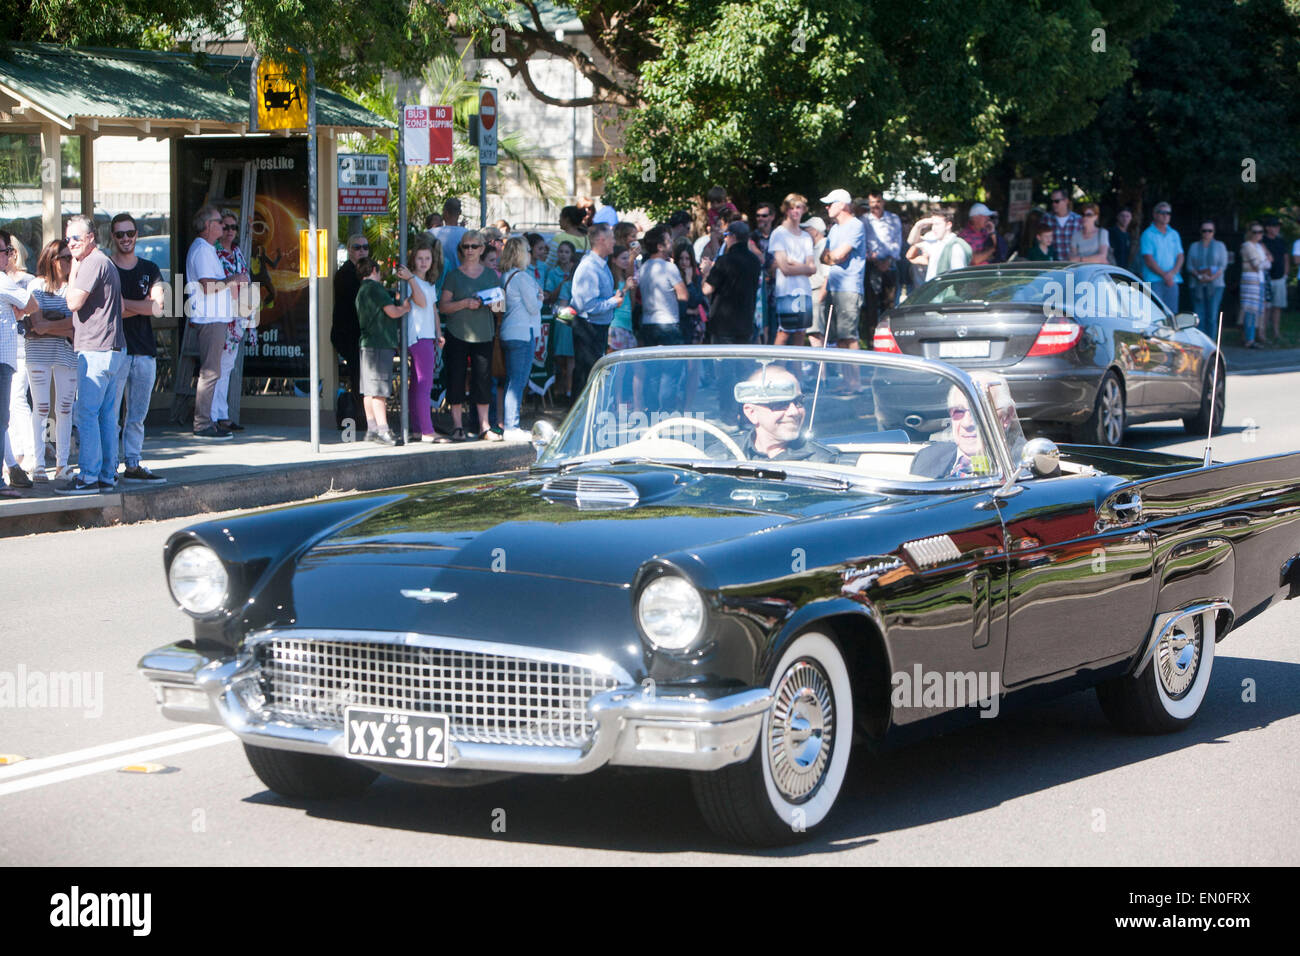 Sydney, Australia. 25th Apr, 2015. Centenary ANZAC day remembrance service at Palm beach Sydney Australia and march on 25th april to remember those who perished in world war one at Gallipoli, here an elderly veteran is given a lift in a Ford thunderbird classic car Credit:  martin berry/Alamy Live News Stock Photo